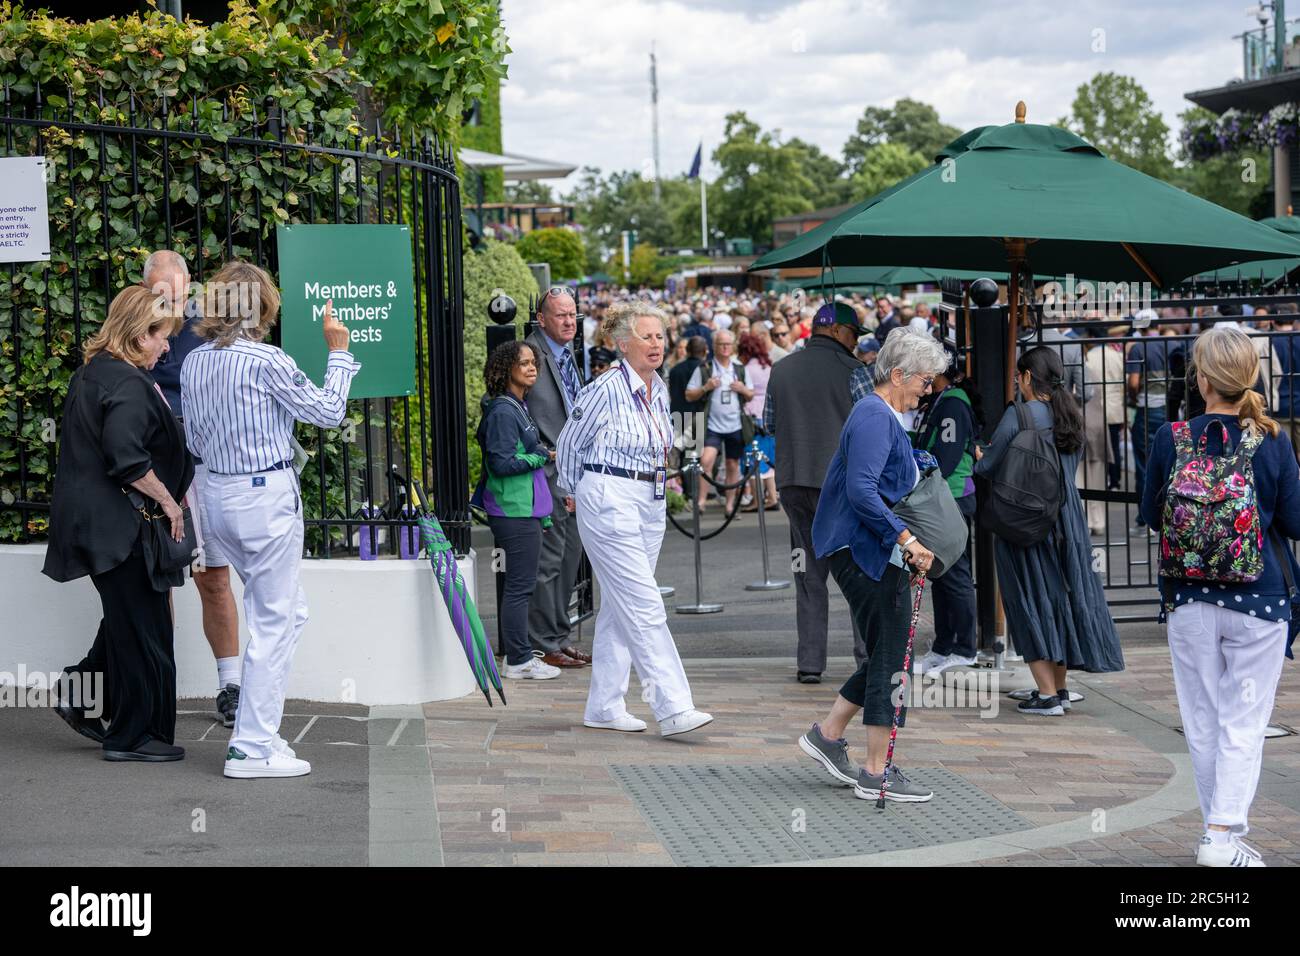 London, UK. 13th July, 2023. large queues amid tight security at the All England Lawn Tennis Club, Wimbledon during the tennis. Credit: Ian Davidson/Alamy Live News Stock Photo